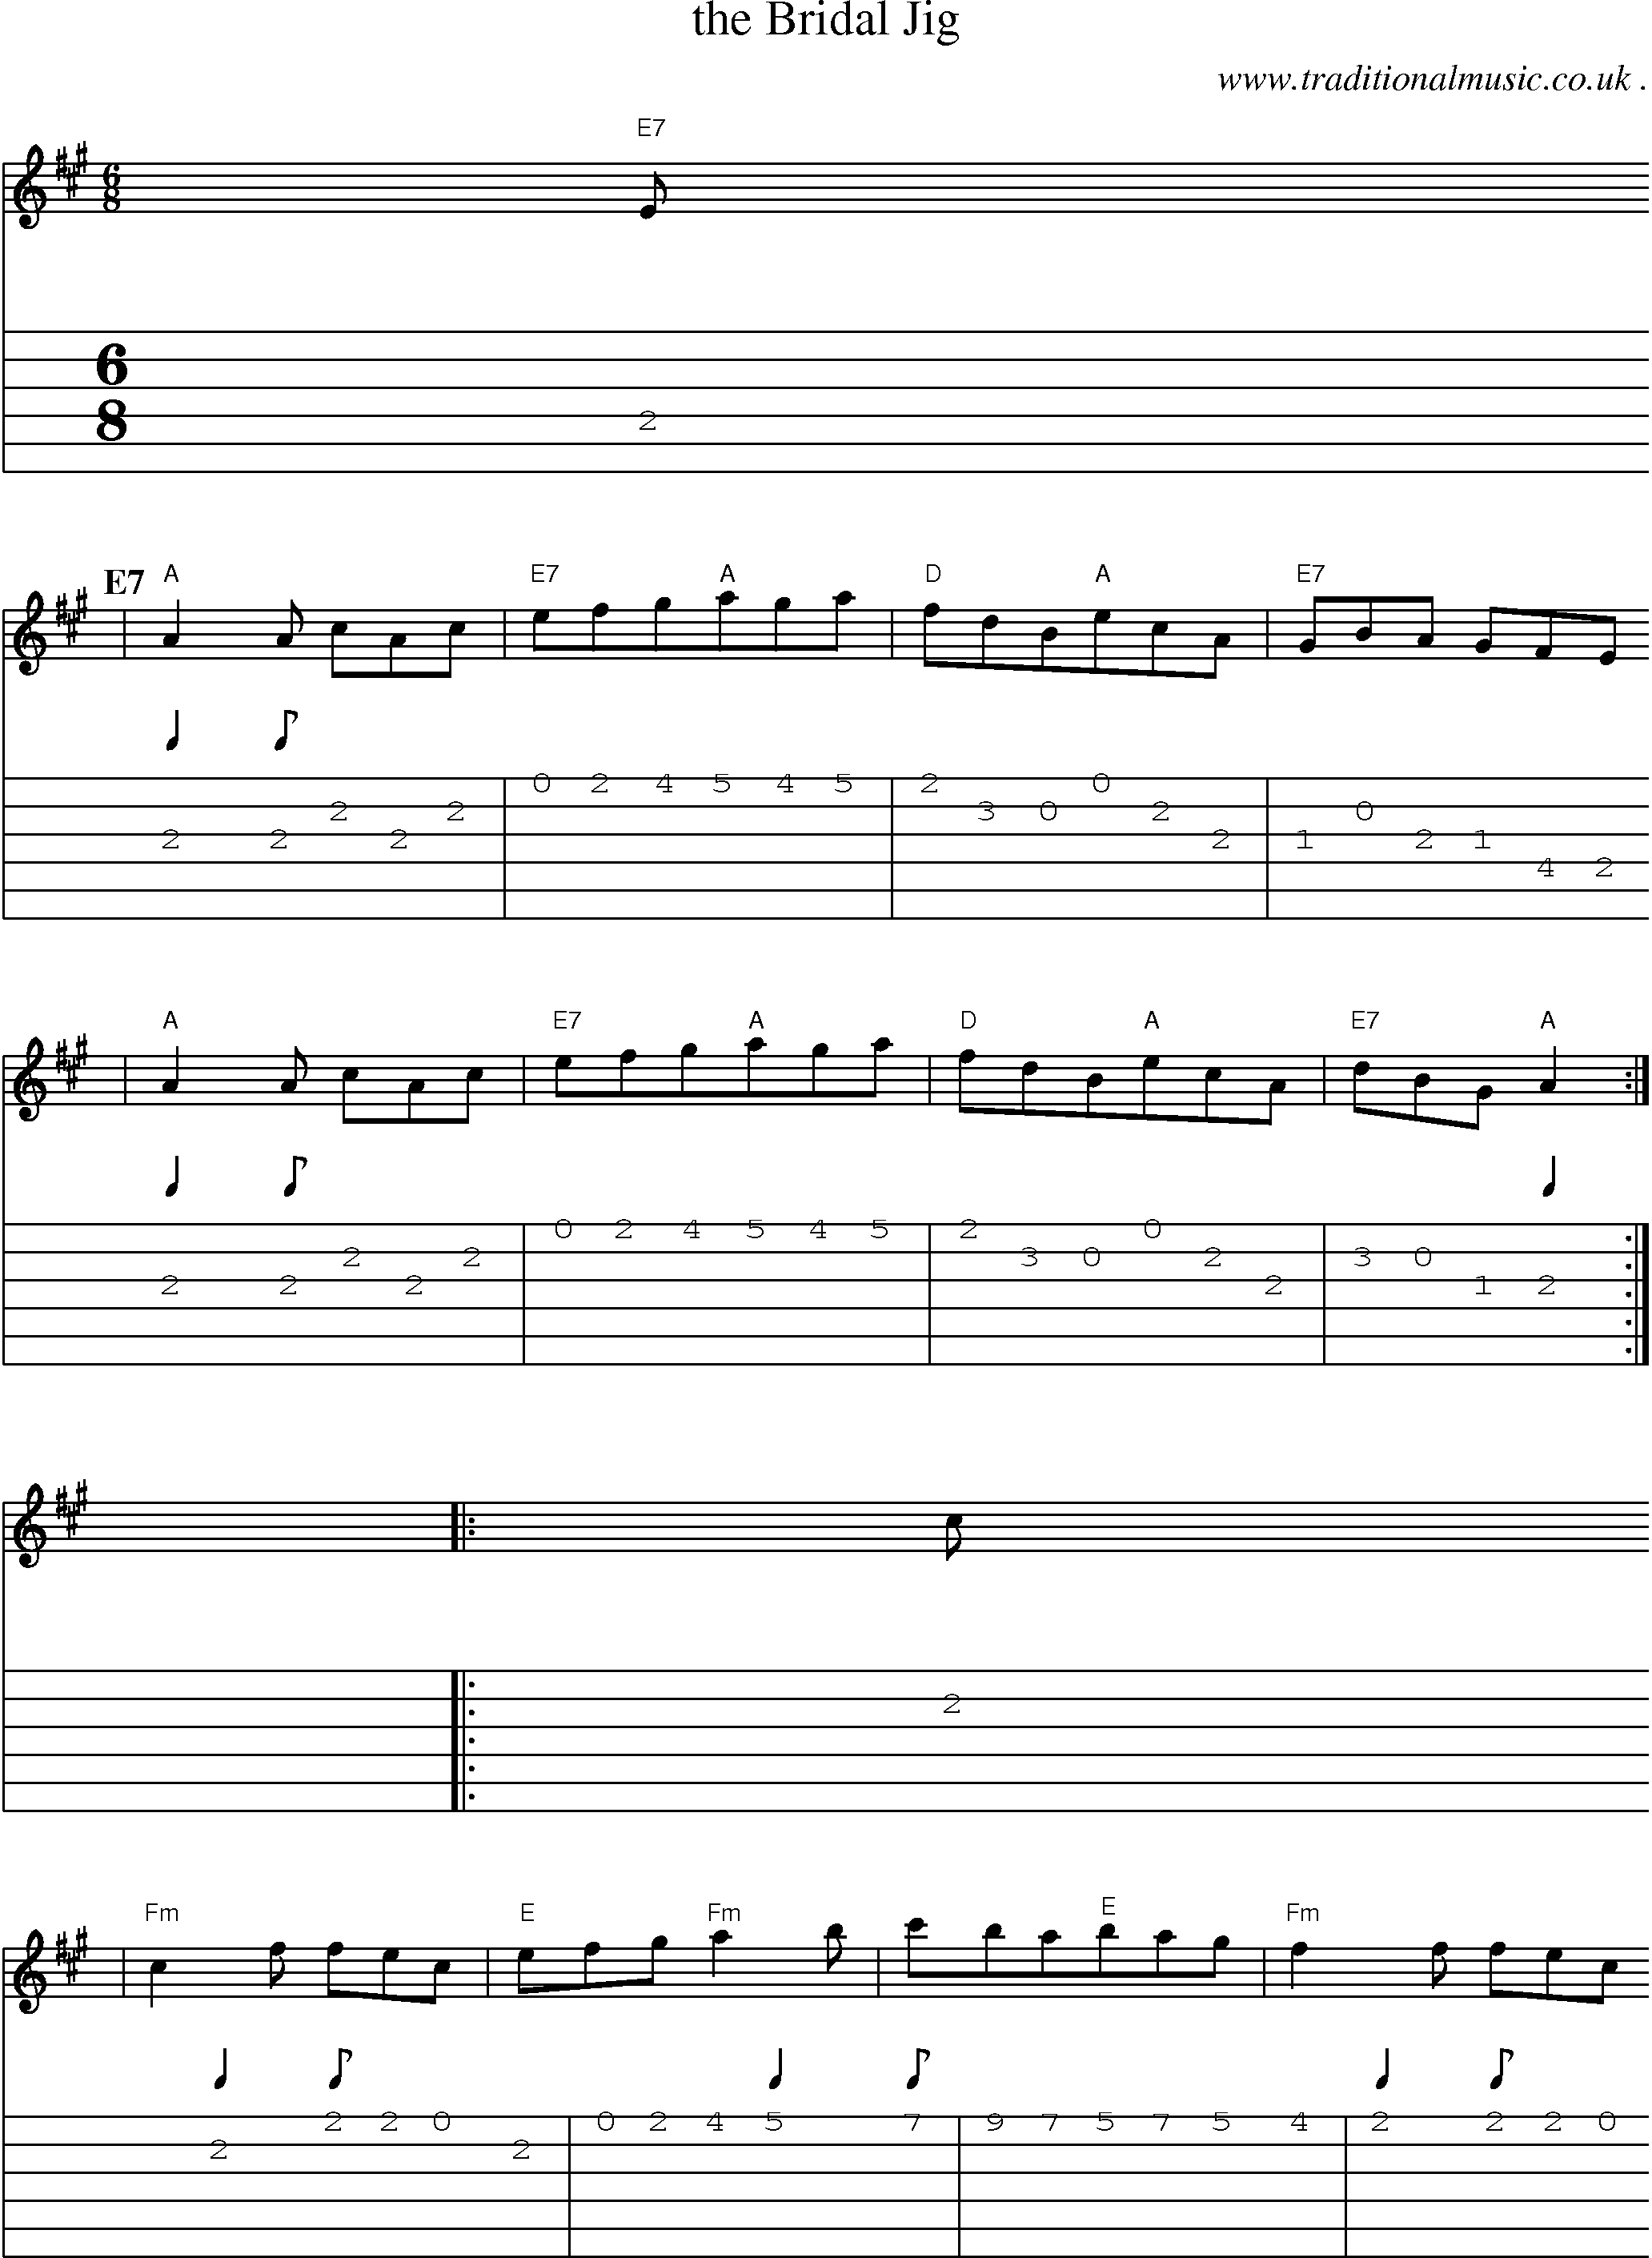 Sheet-Music and Guitar Tabs for The Bridal Jig